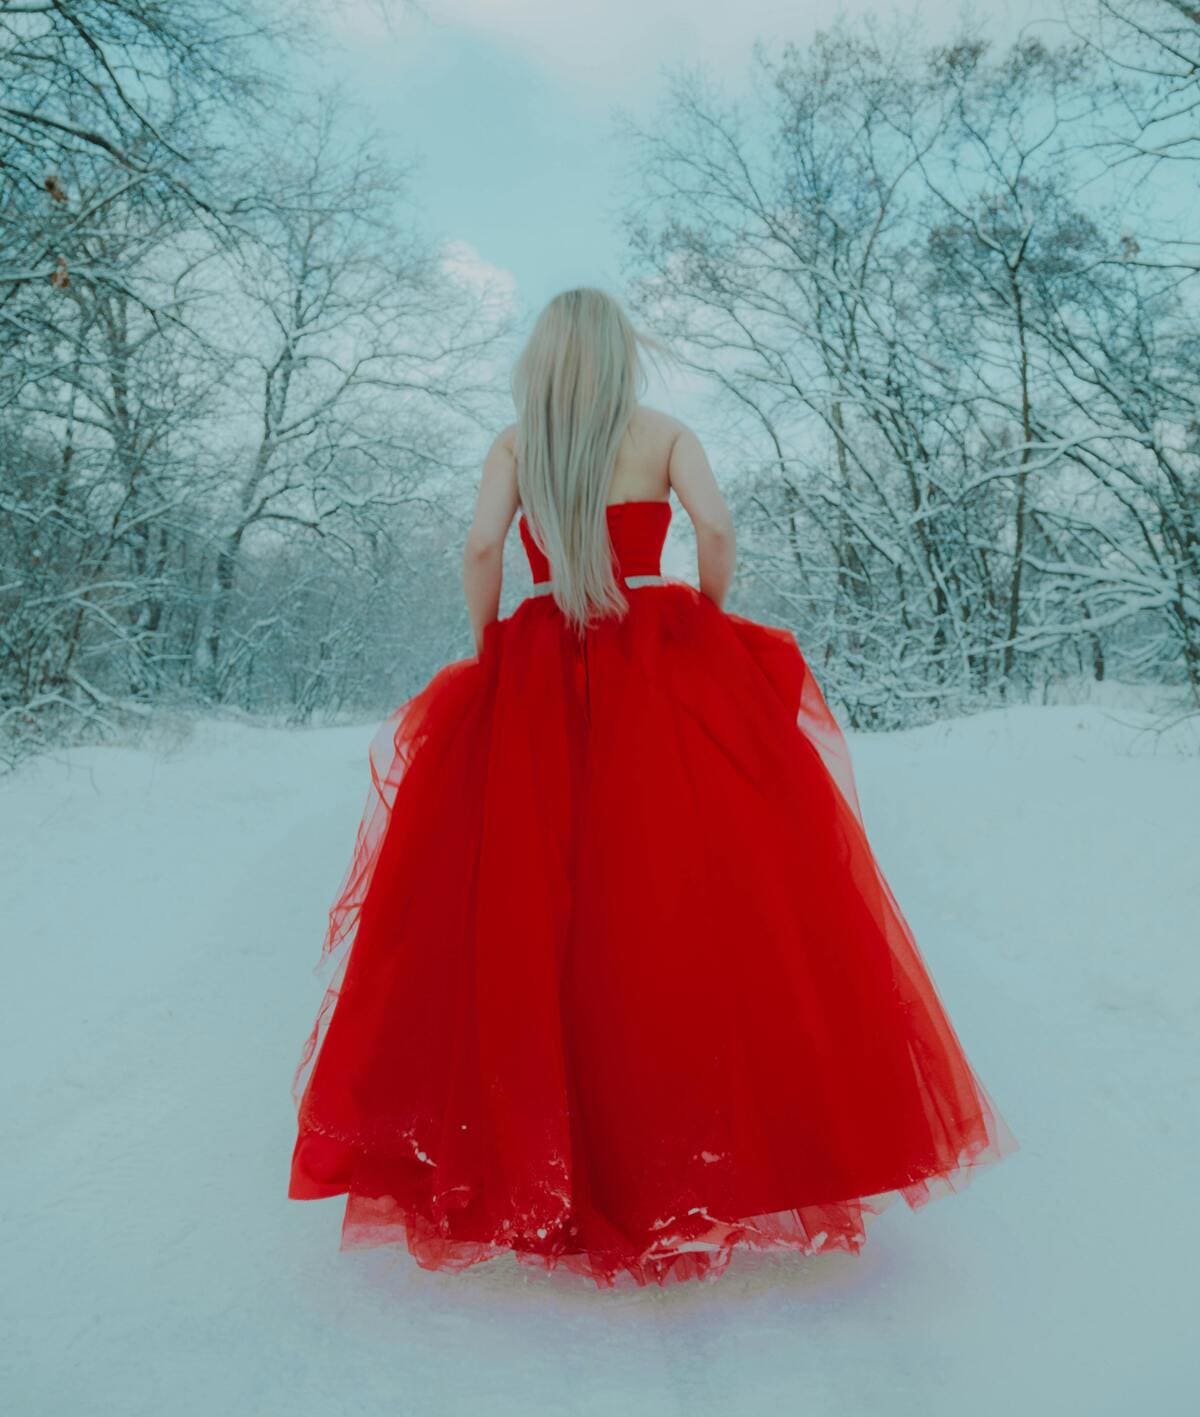 woman in red dress in winter forest